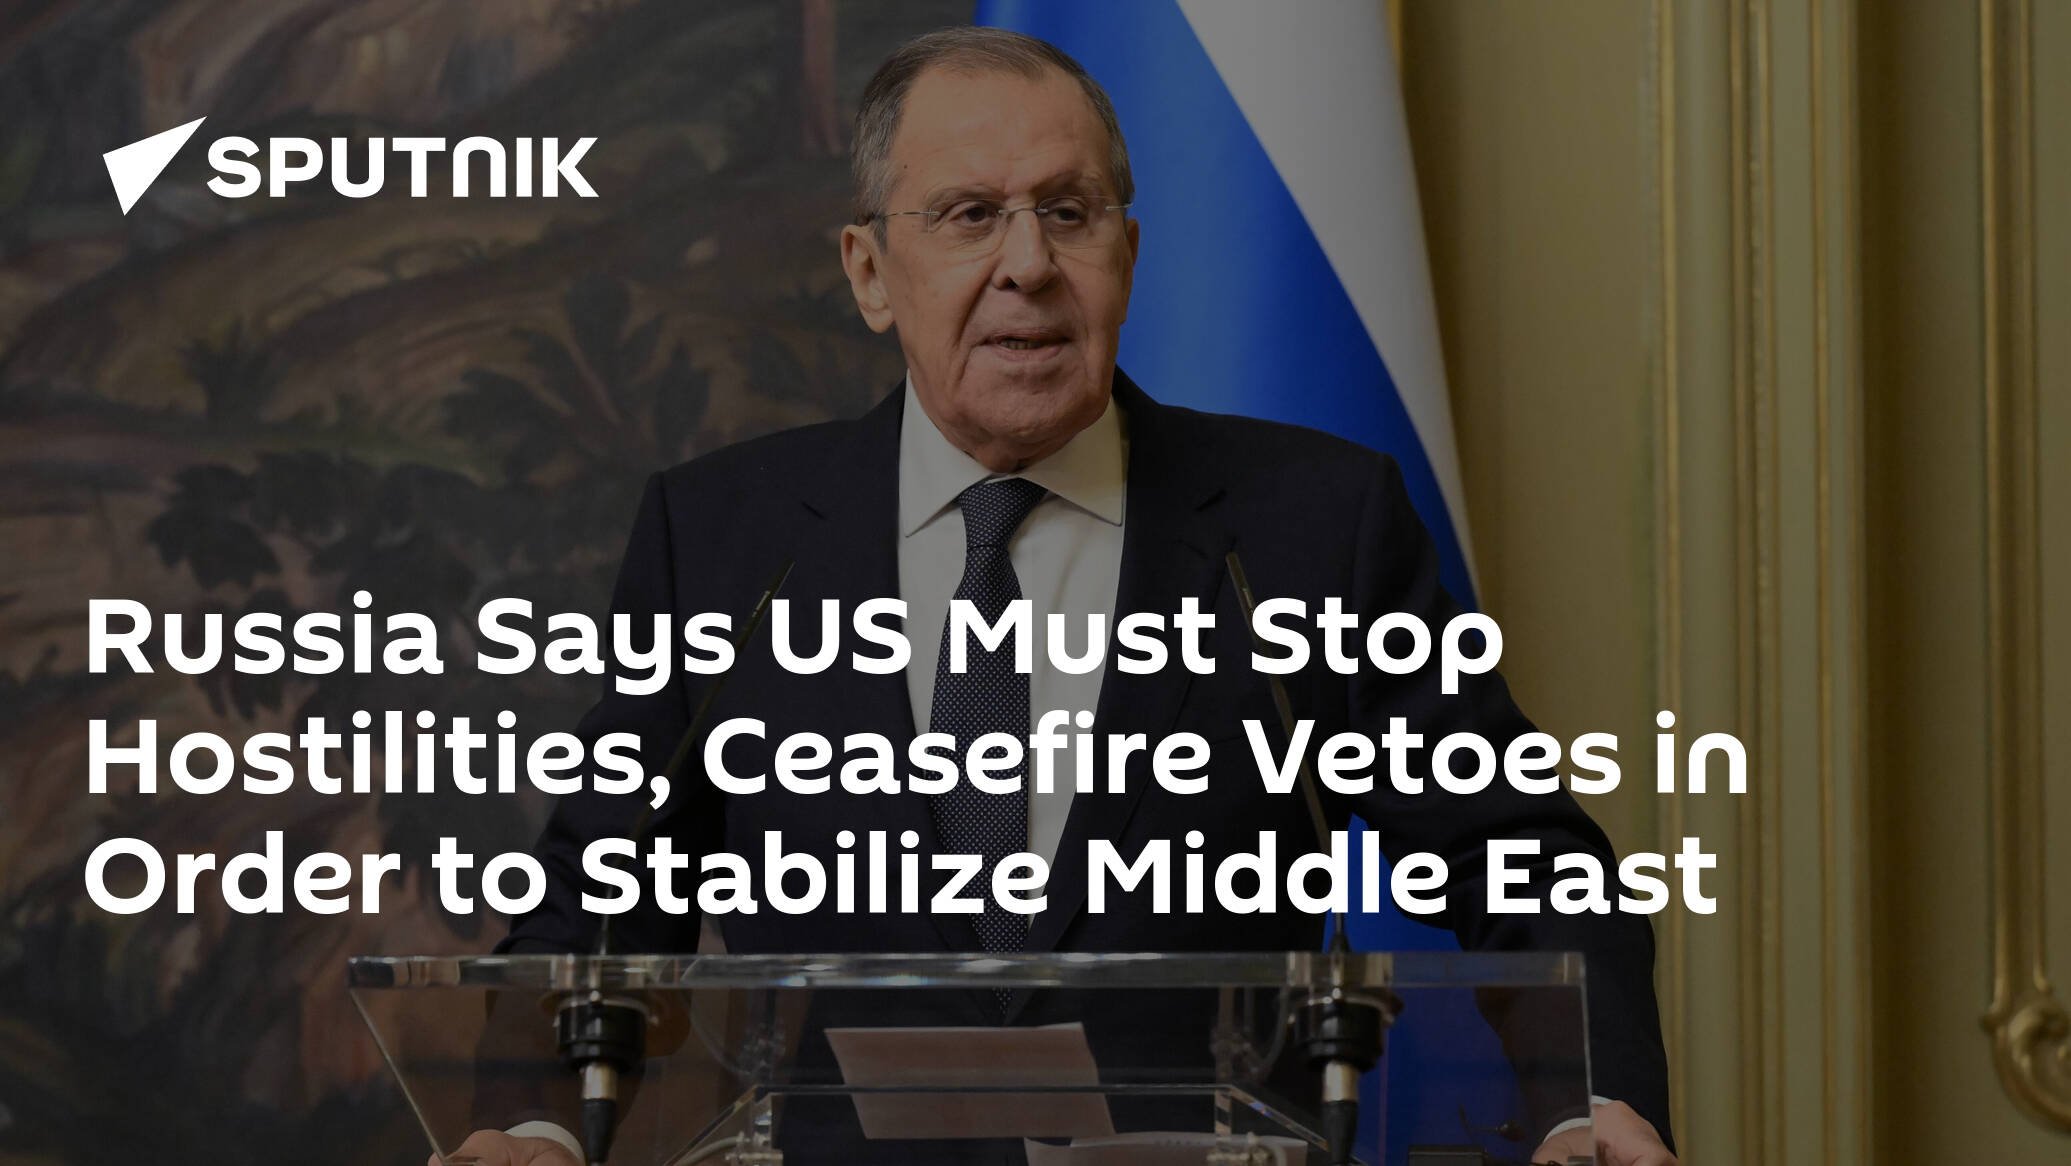 Russia Says US Must Stop Hostilities, Ceasefire Vetoes in Order to Stabilize Middle East